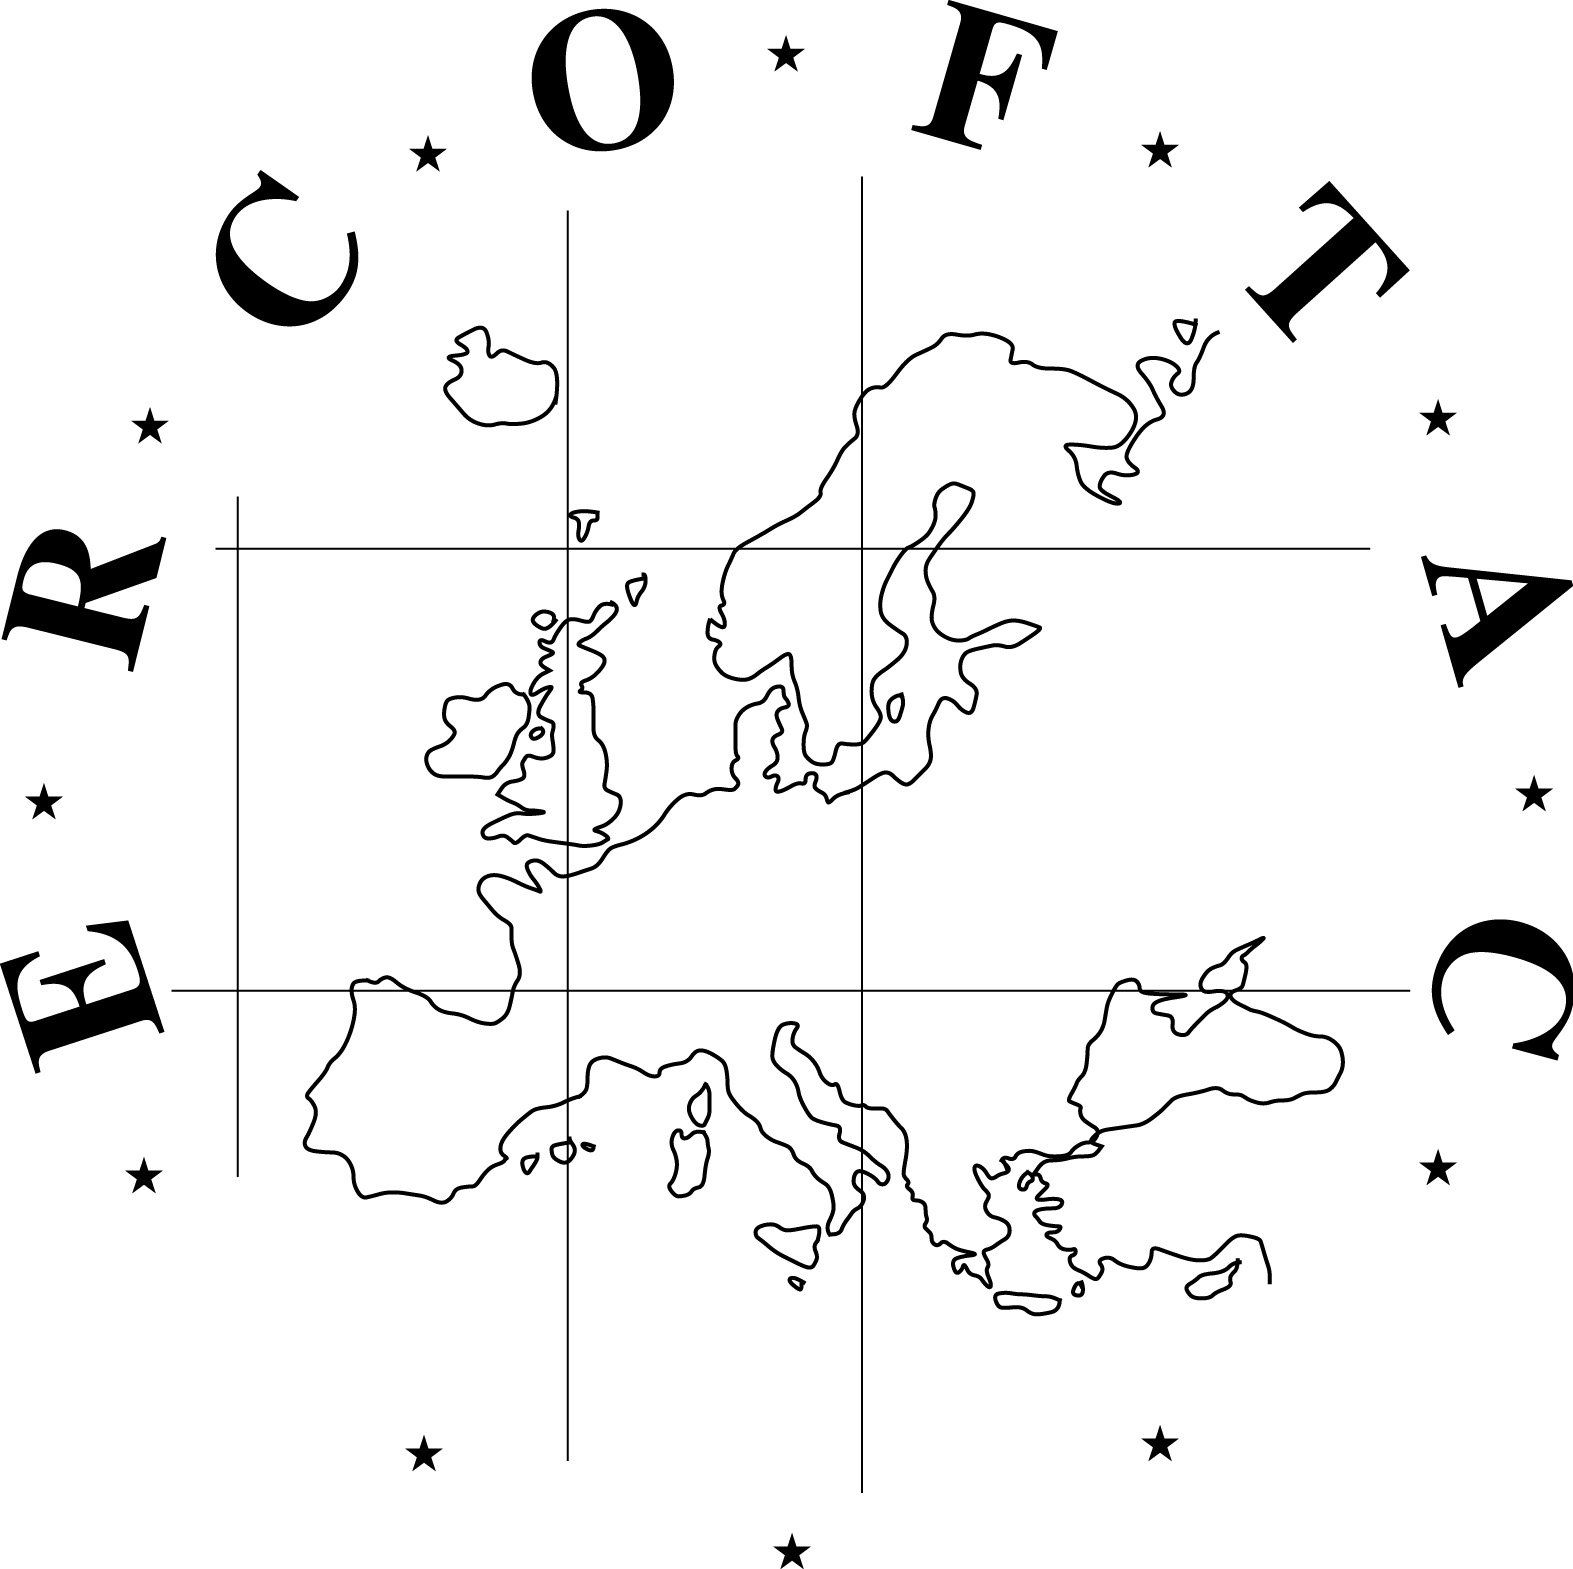 ERCOFTAC - European Research Community on Flow, Turbulence and Combustion